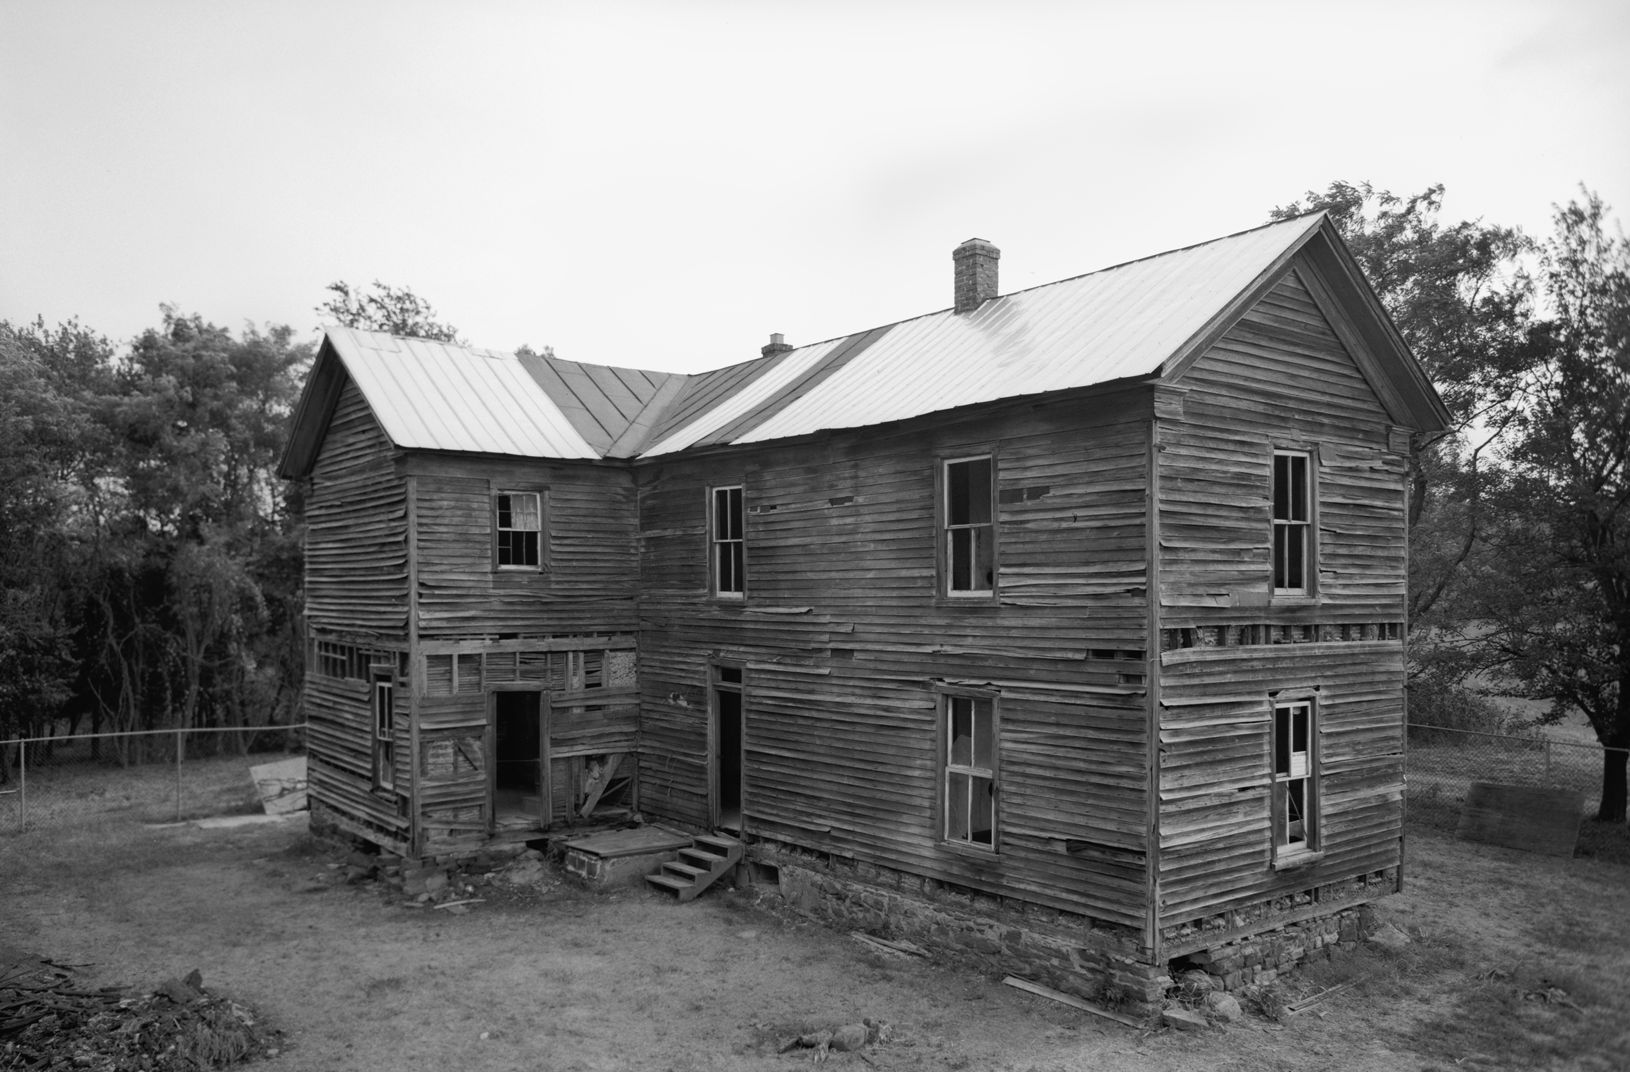 The Brawner farm house was a focal point for both sides during the battle. John Brawner and his family left the house as shots and shells passed through it, but returned later to find it still standing. 